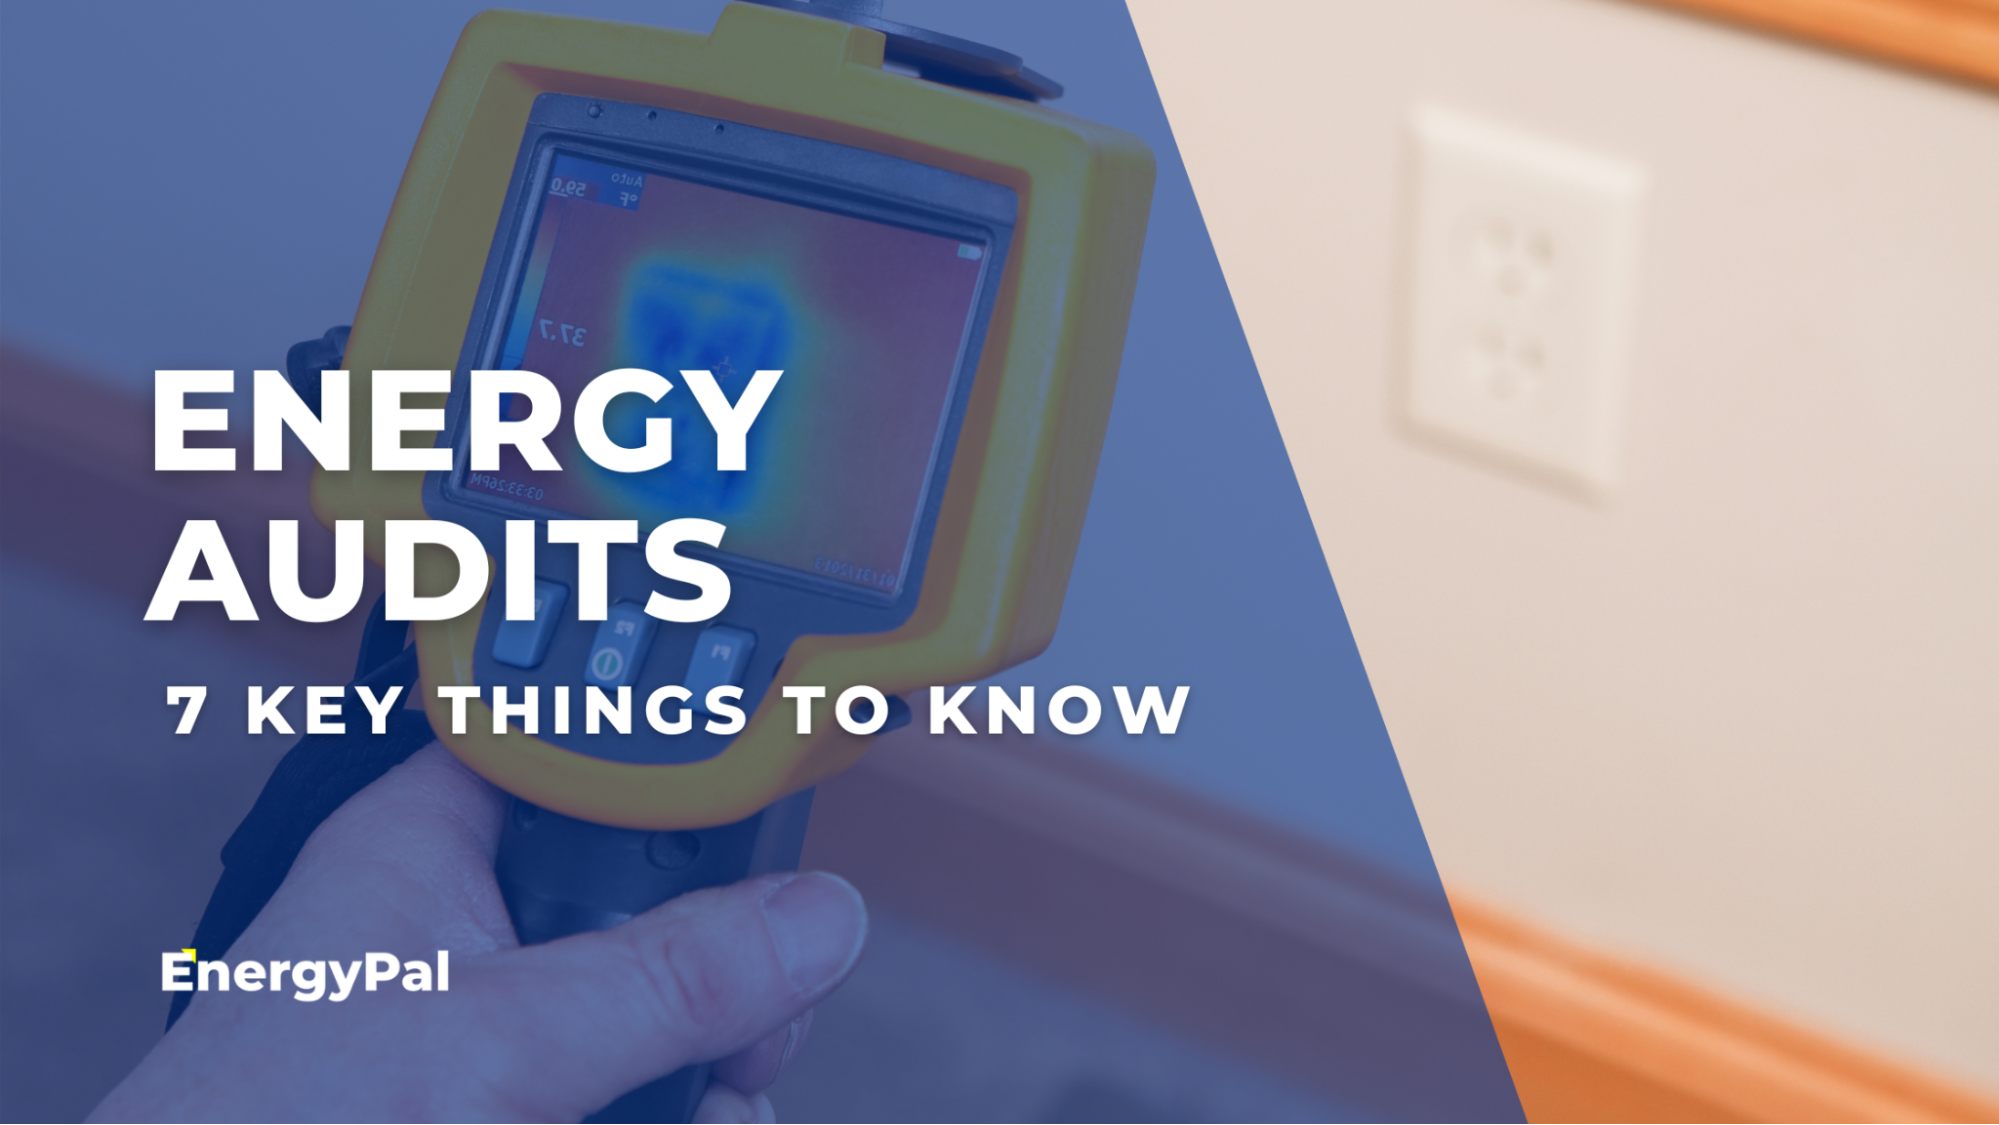 Home Energy Audits: 7 Key Things to Know